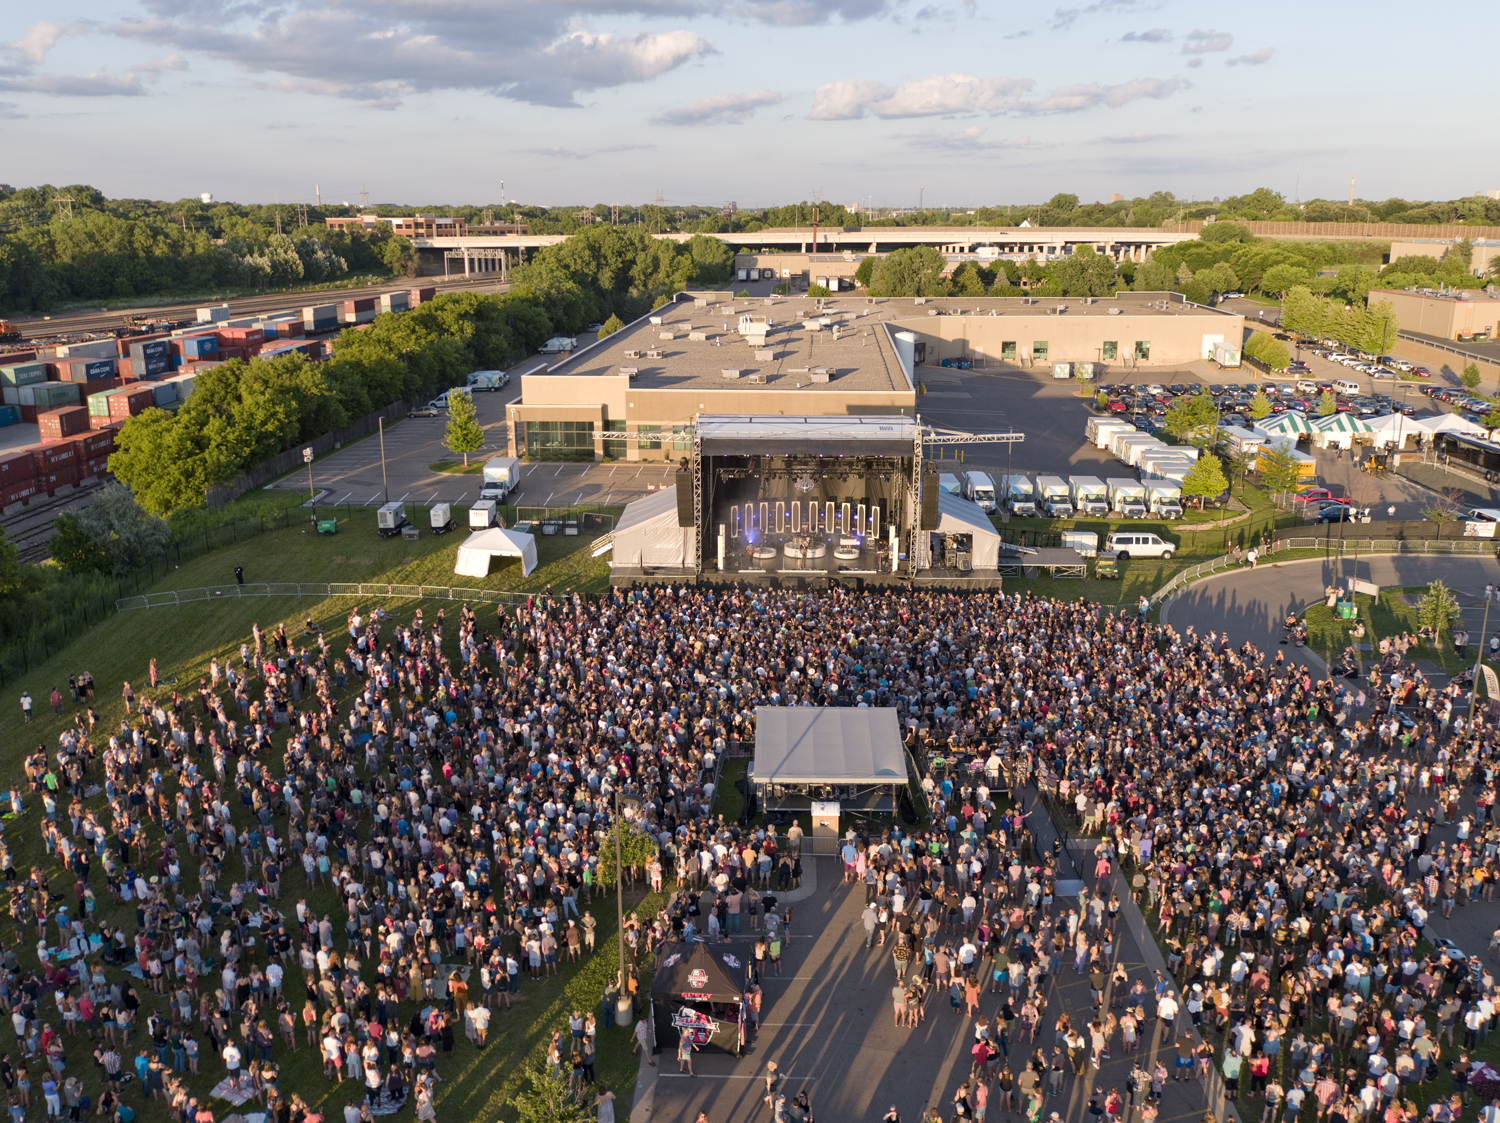 Lord Huron performing at a First Avenue/Surly Brewing concert at Festival Field, Minneapolis, MN July 2019